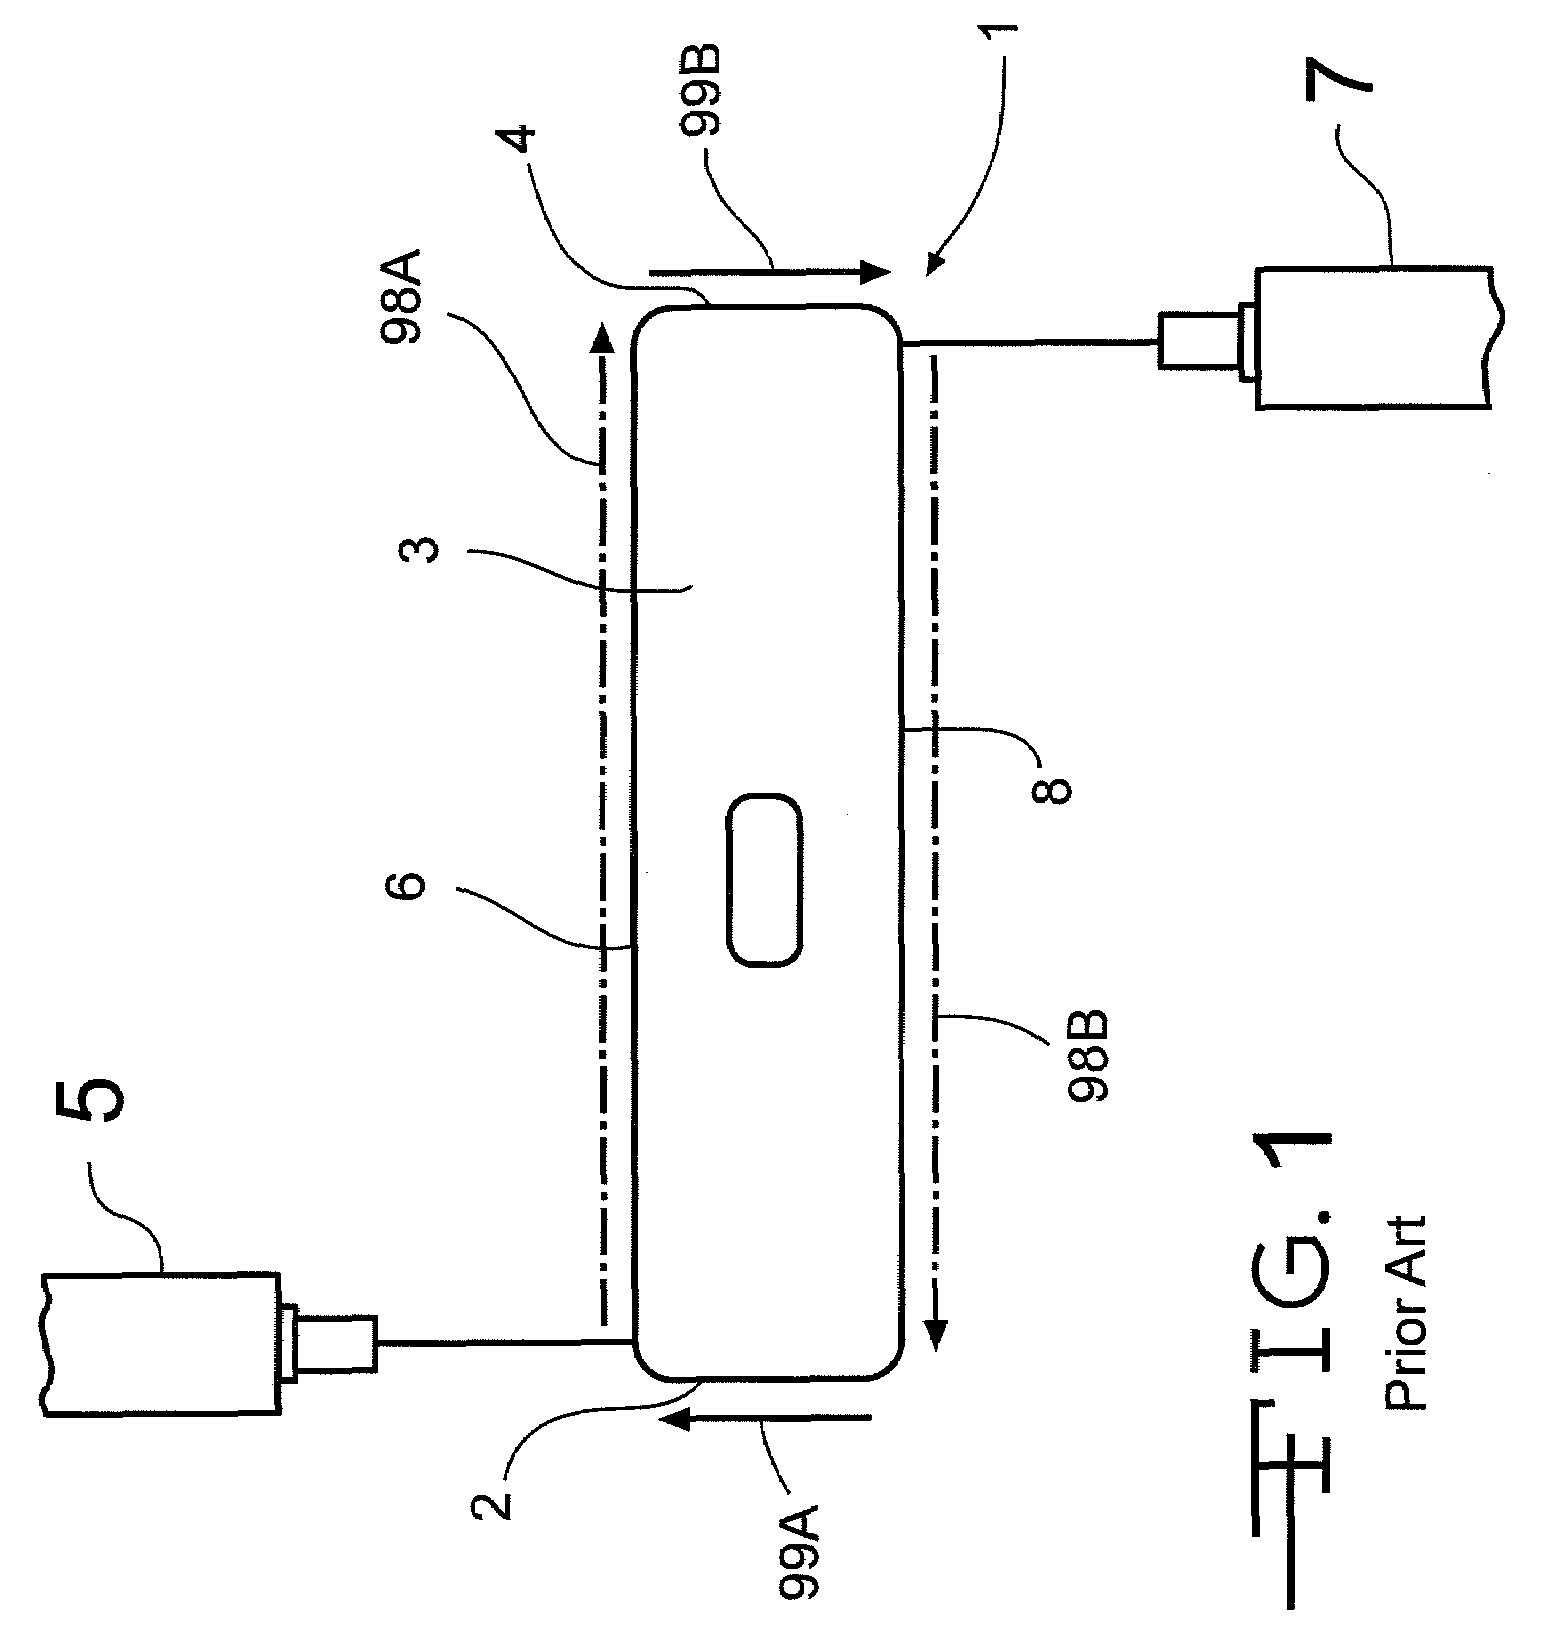 Laser Weld Process For Seam Welded Electrochemical Devices